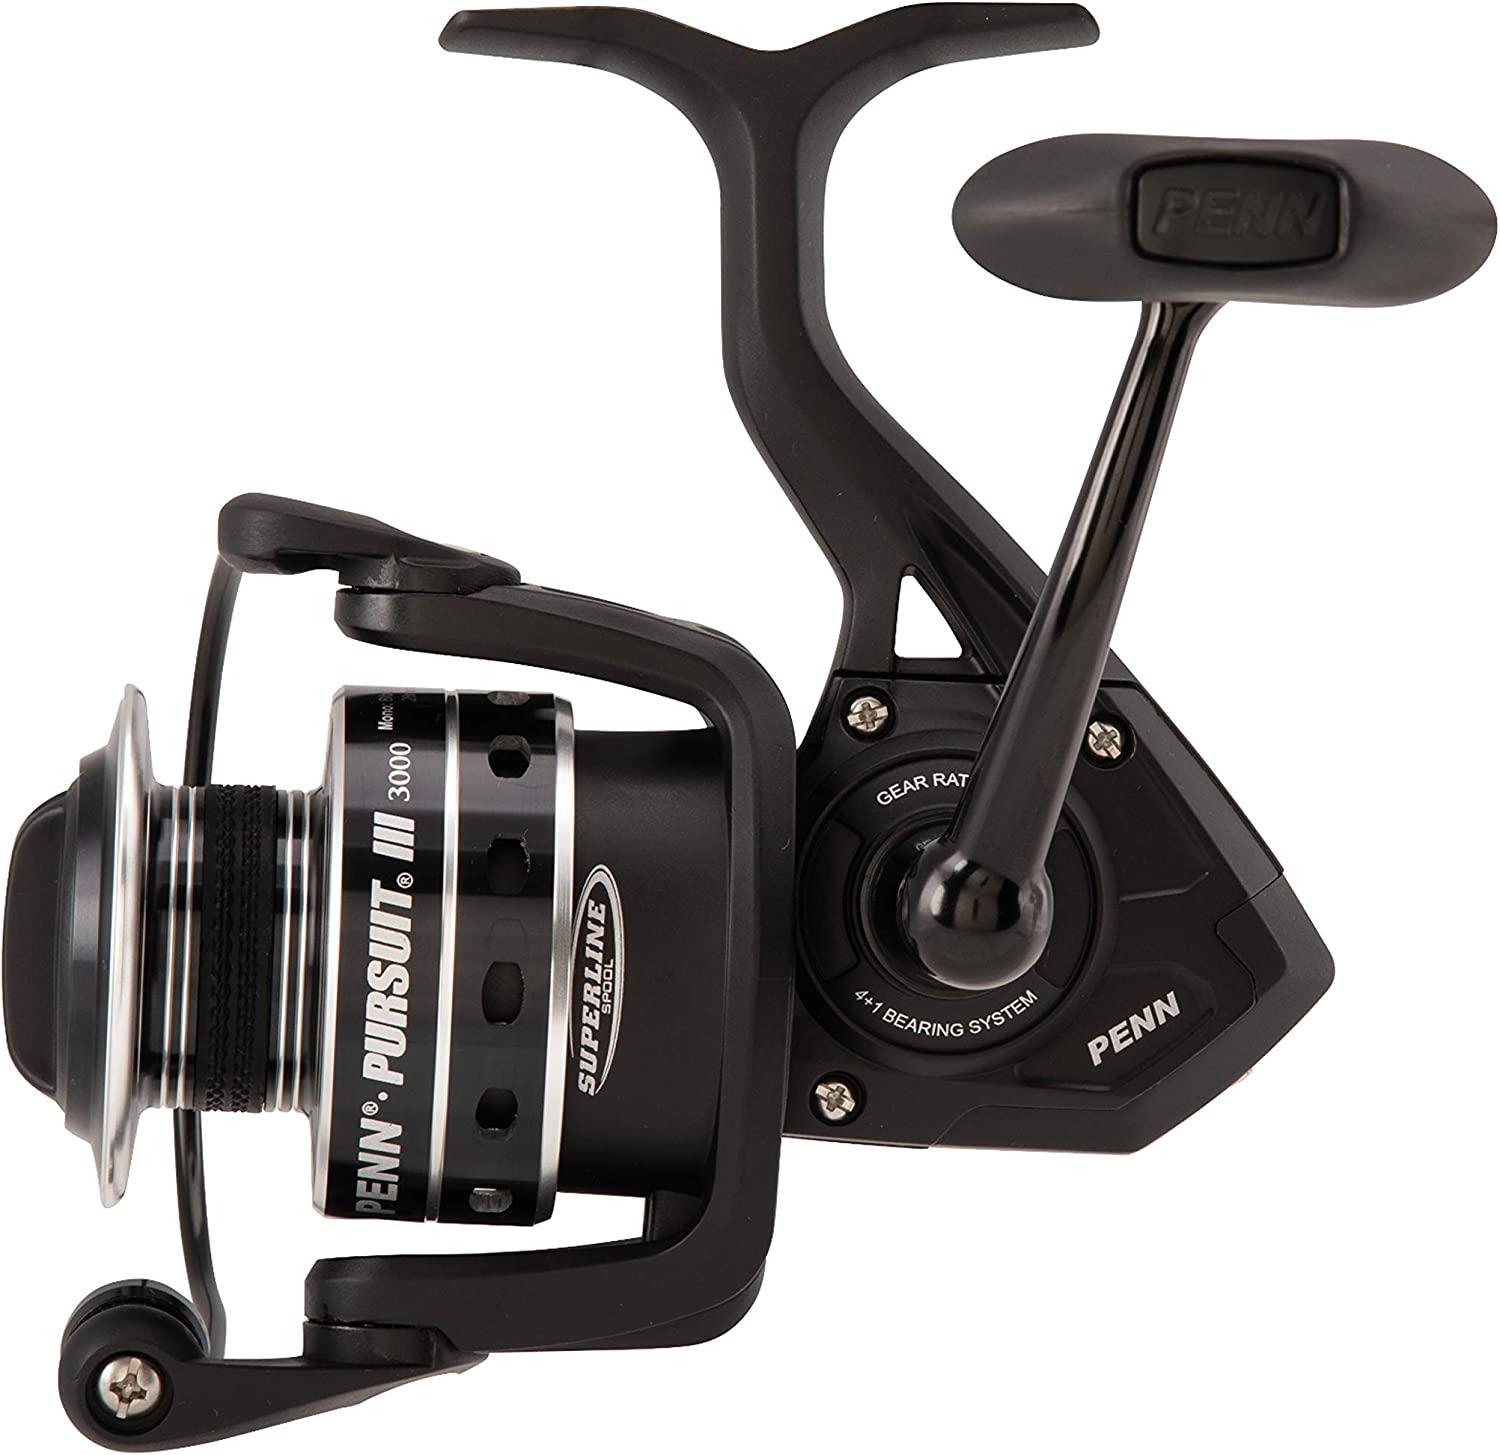 Penn Pursuit III Nearshore Spinning Fishing Reel, Size 5000,  Corrosion-Resistant Graphite Body and Line Capacity Rings, Machined  Aluminum Superline Spool, HT-100 Drag System Pursuit Iii 2500